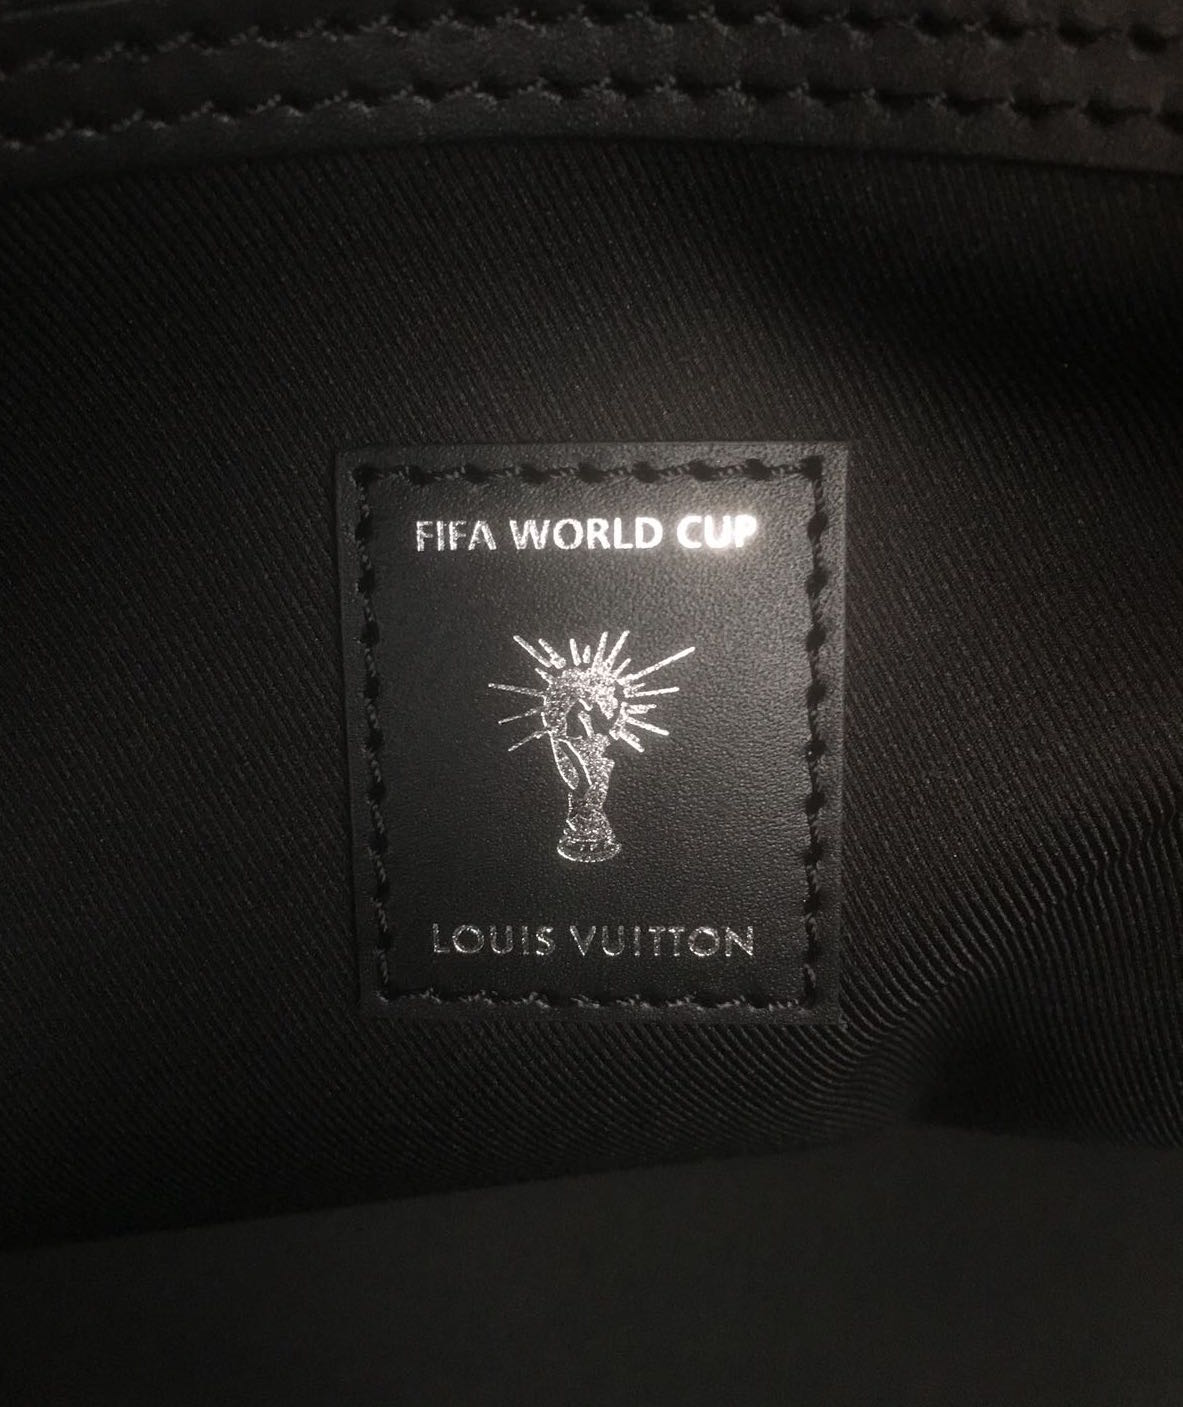 Louis Vuitton | FIFA WORLD CUP Keepall Bandouliere 50 | M52187– TC